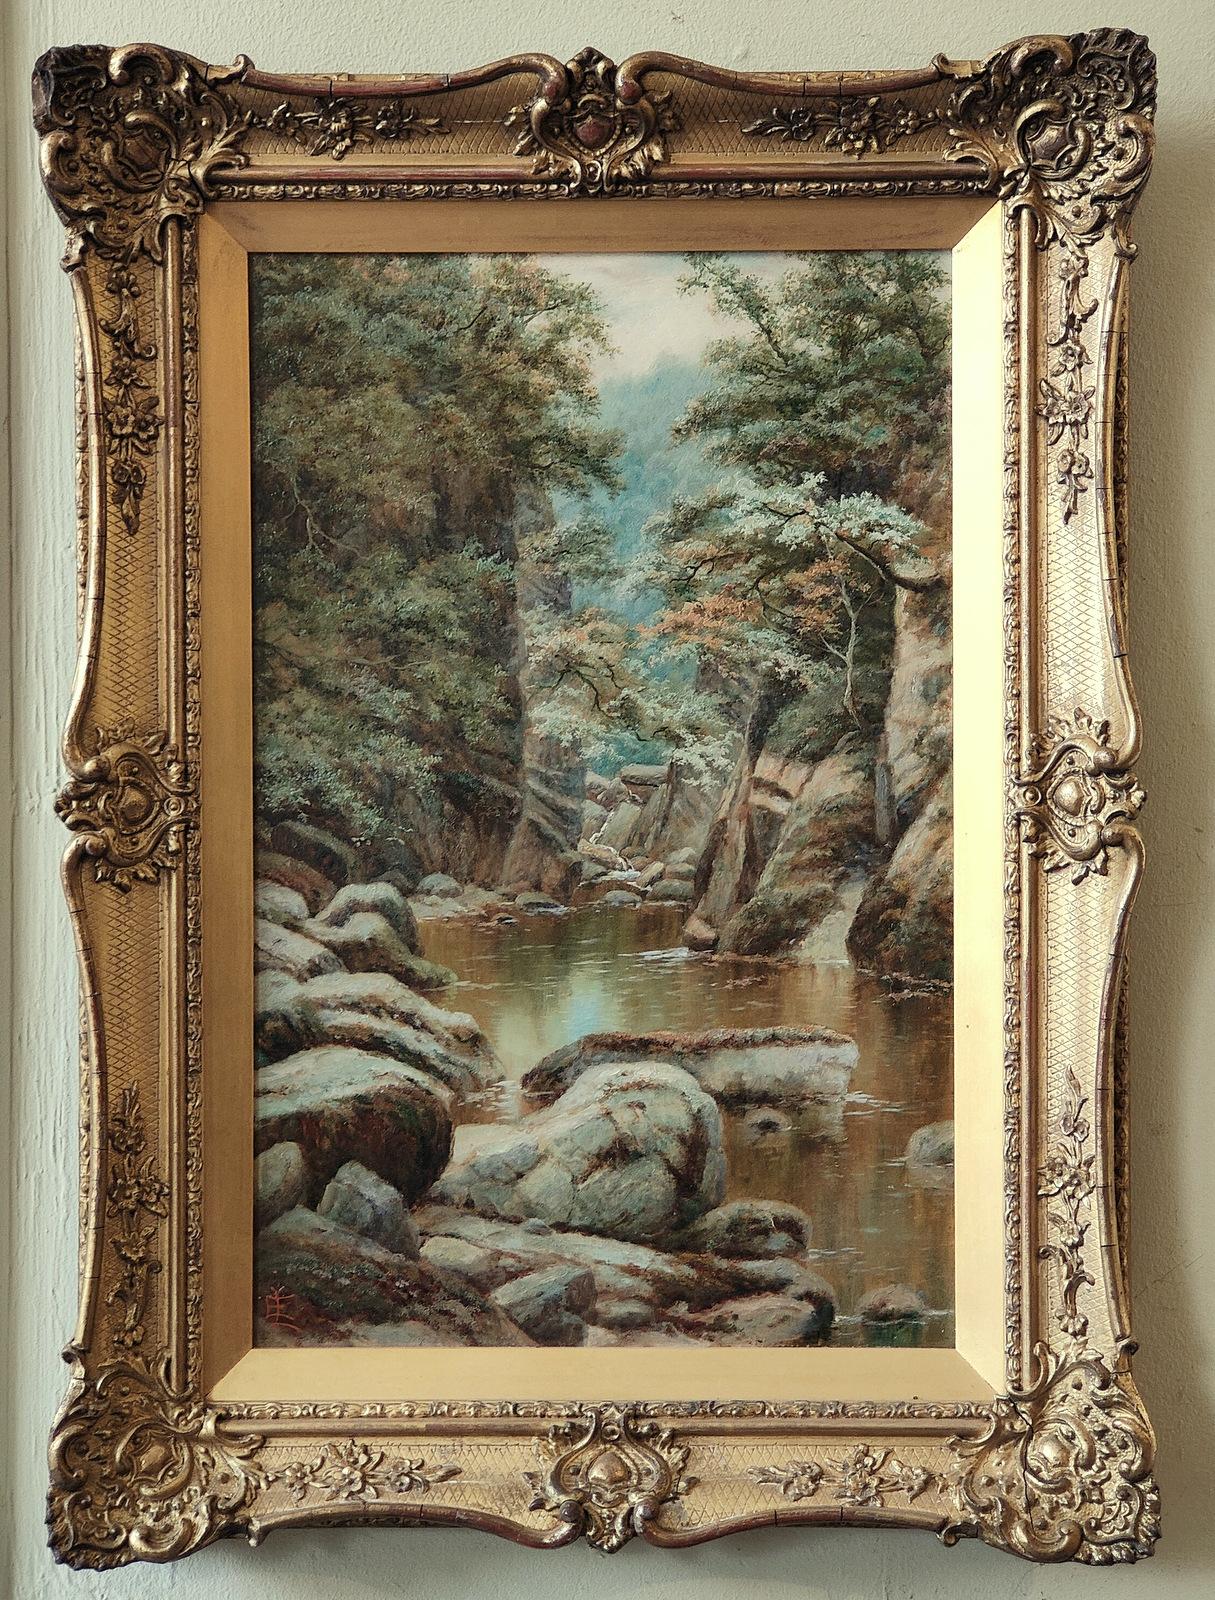 Oil Painting by Edgar Longstaff  "Fairy Glen" 1849 -1912 He was a painter of rustic landscape and atmospheric highland views exhibited at the R.A Dublin and Birmingham. Oil on canvas. Inscribed Signed and in original frame

Dimensions